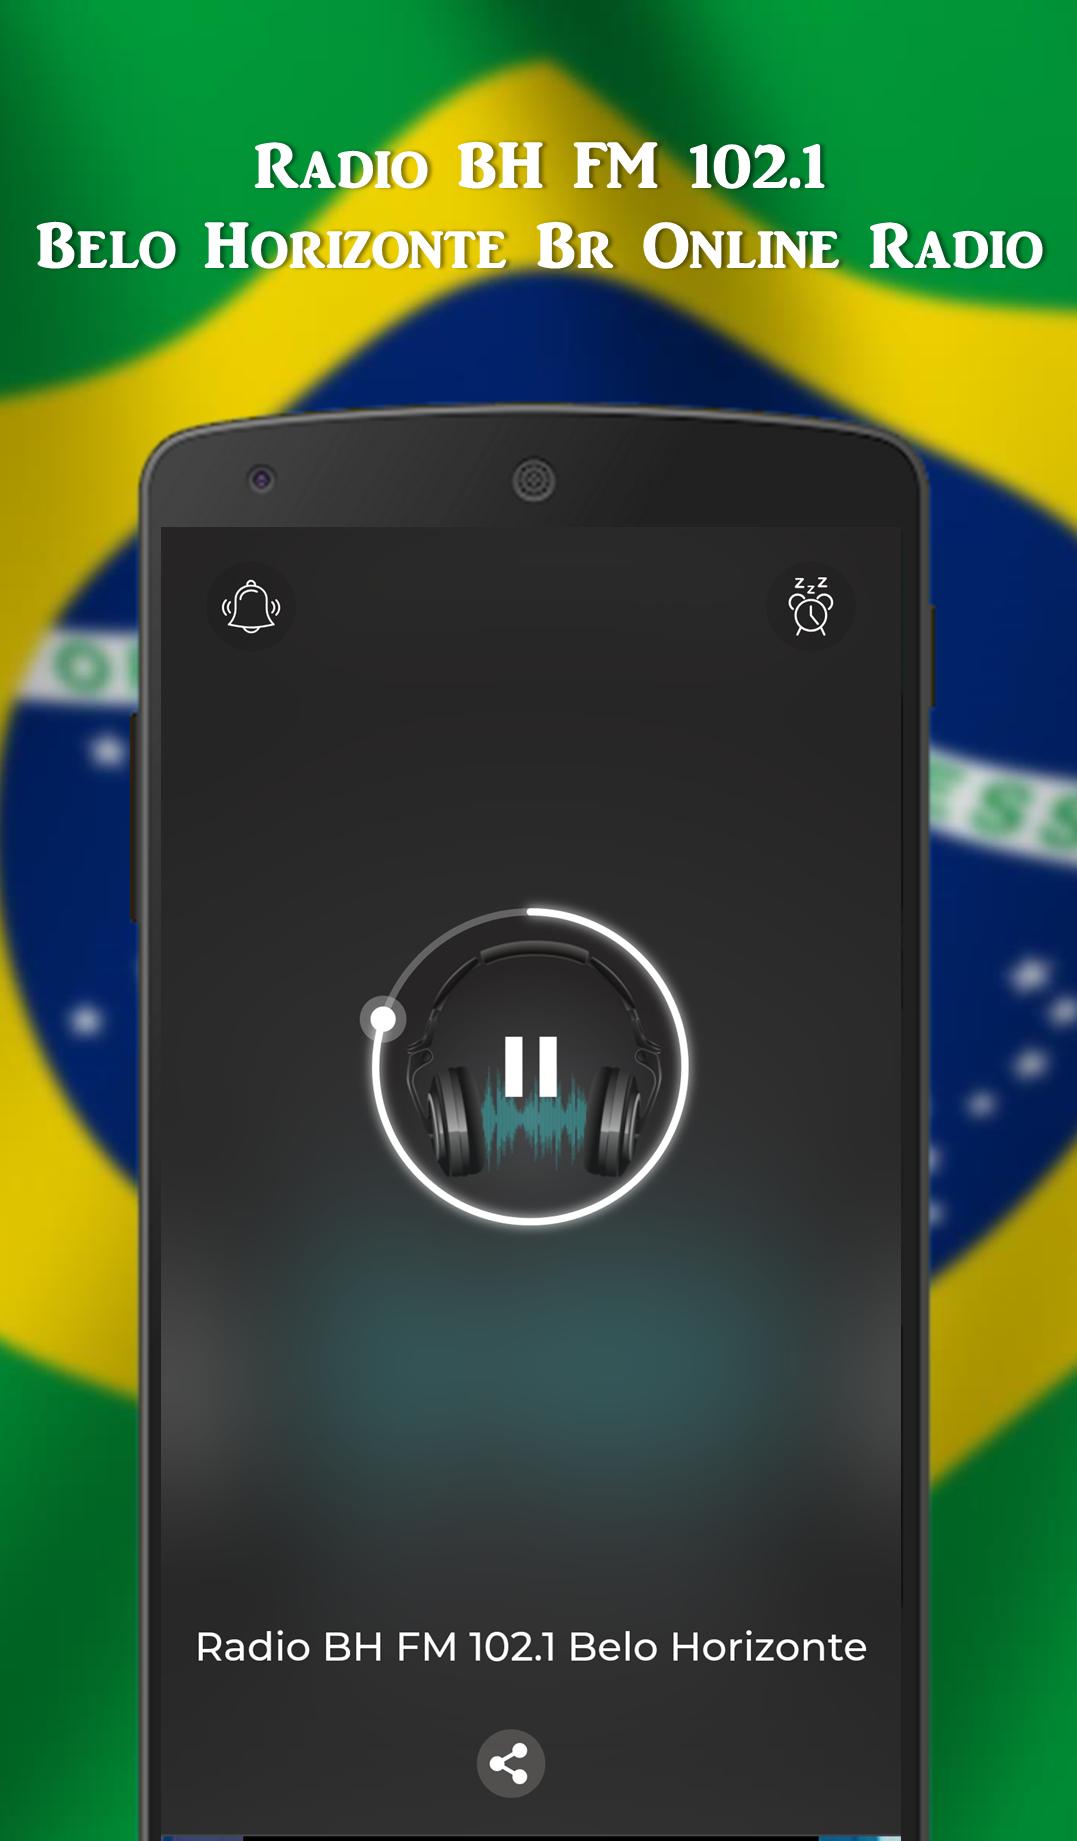 Radio BH FM 102.1 Belo Horizonte for Android - APK Download